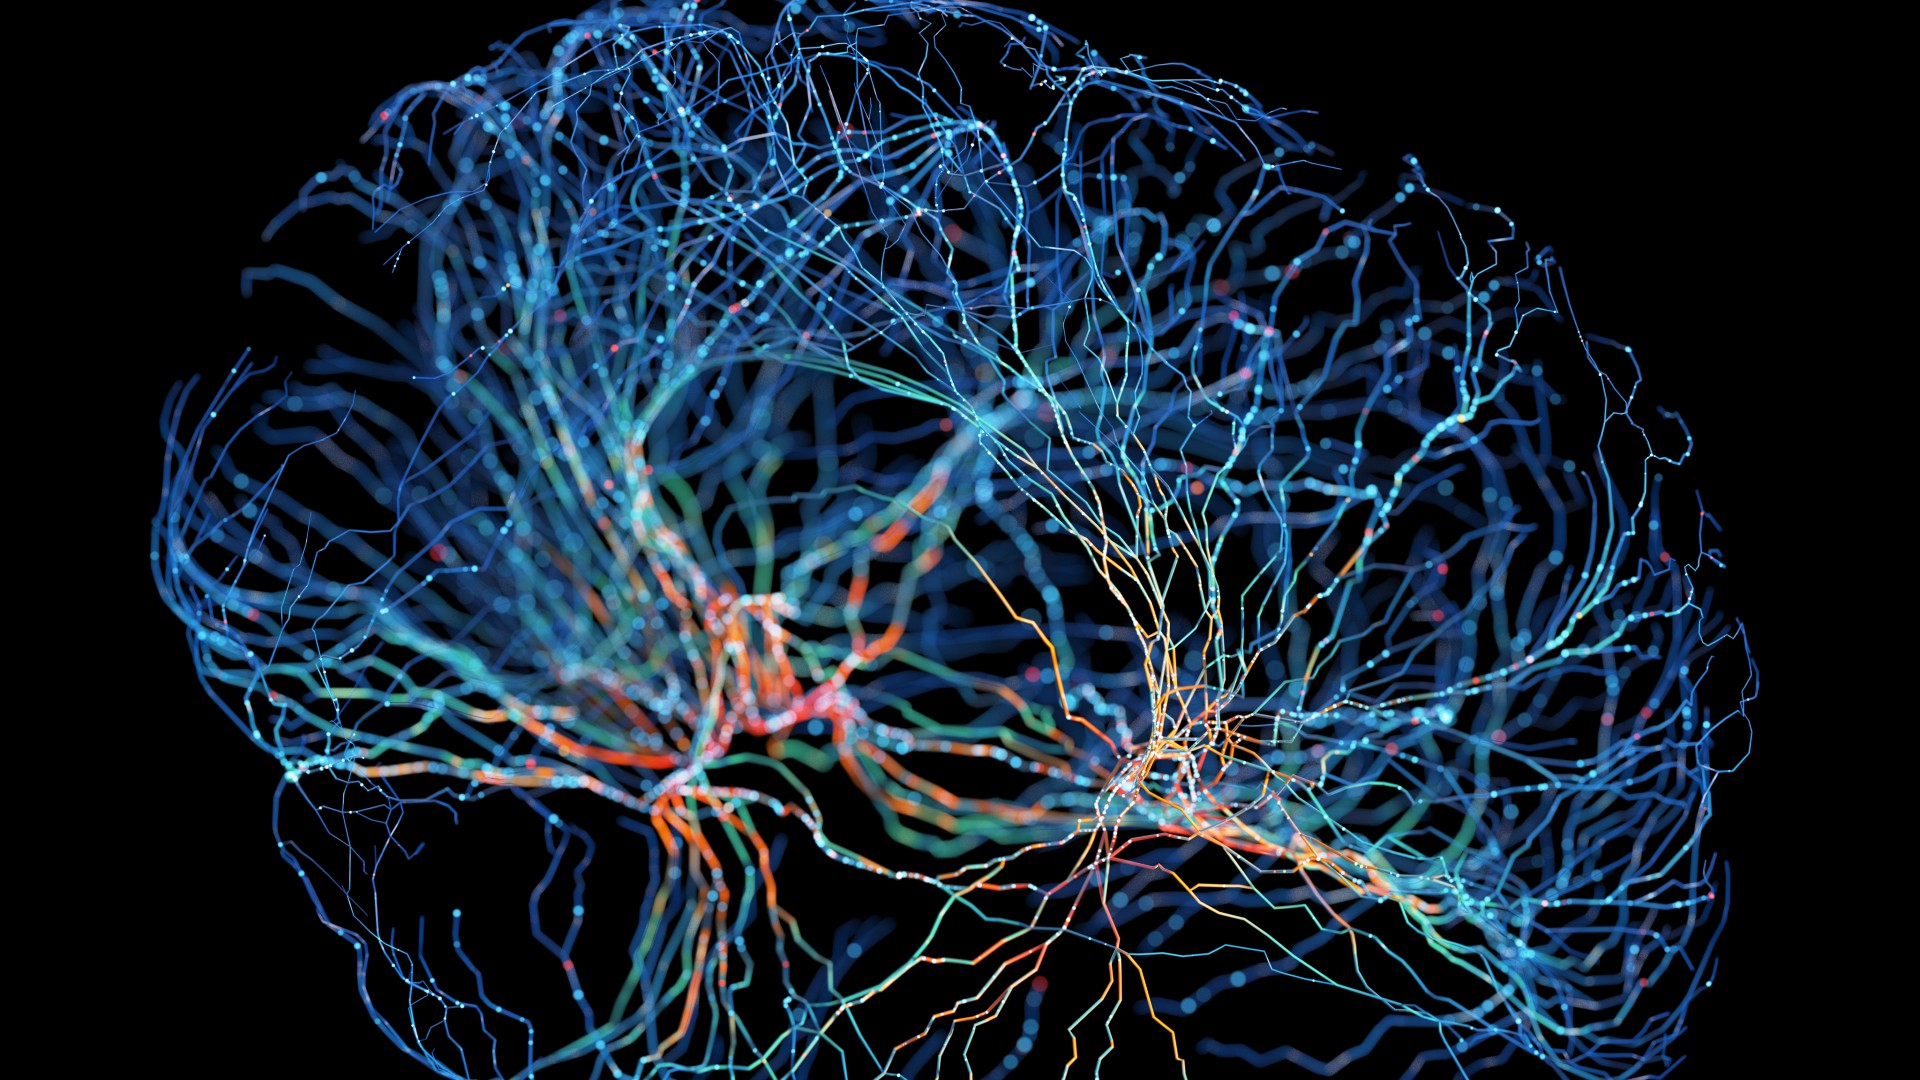 Illustration of a network of neurons with glowing connections against a black background